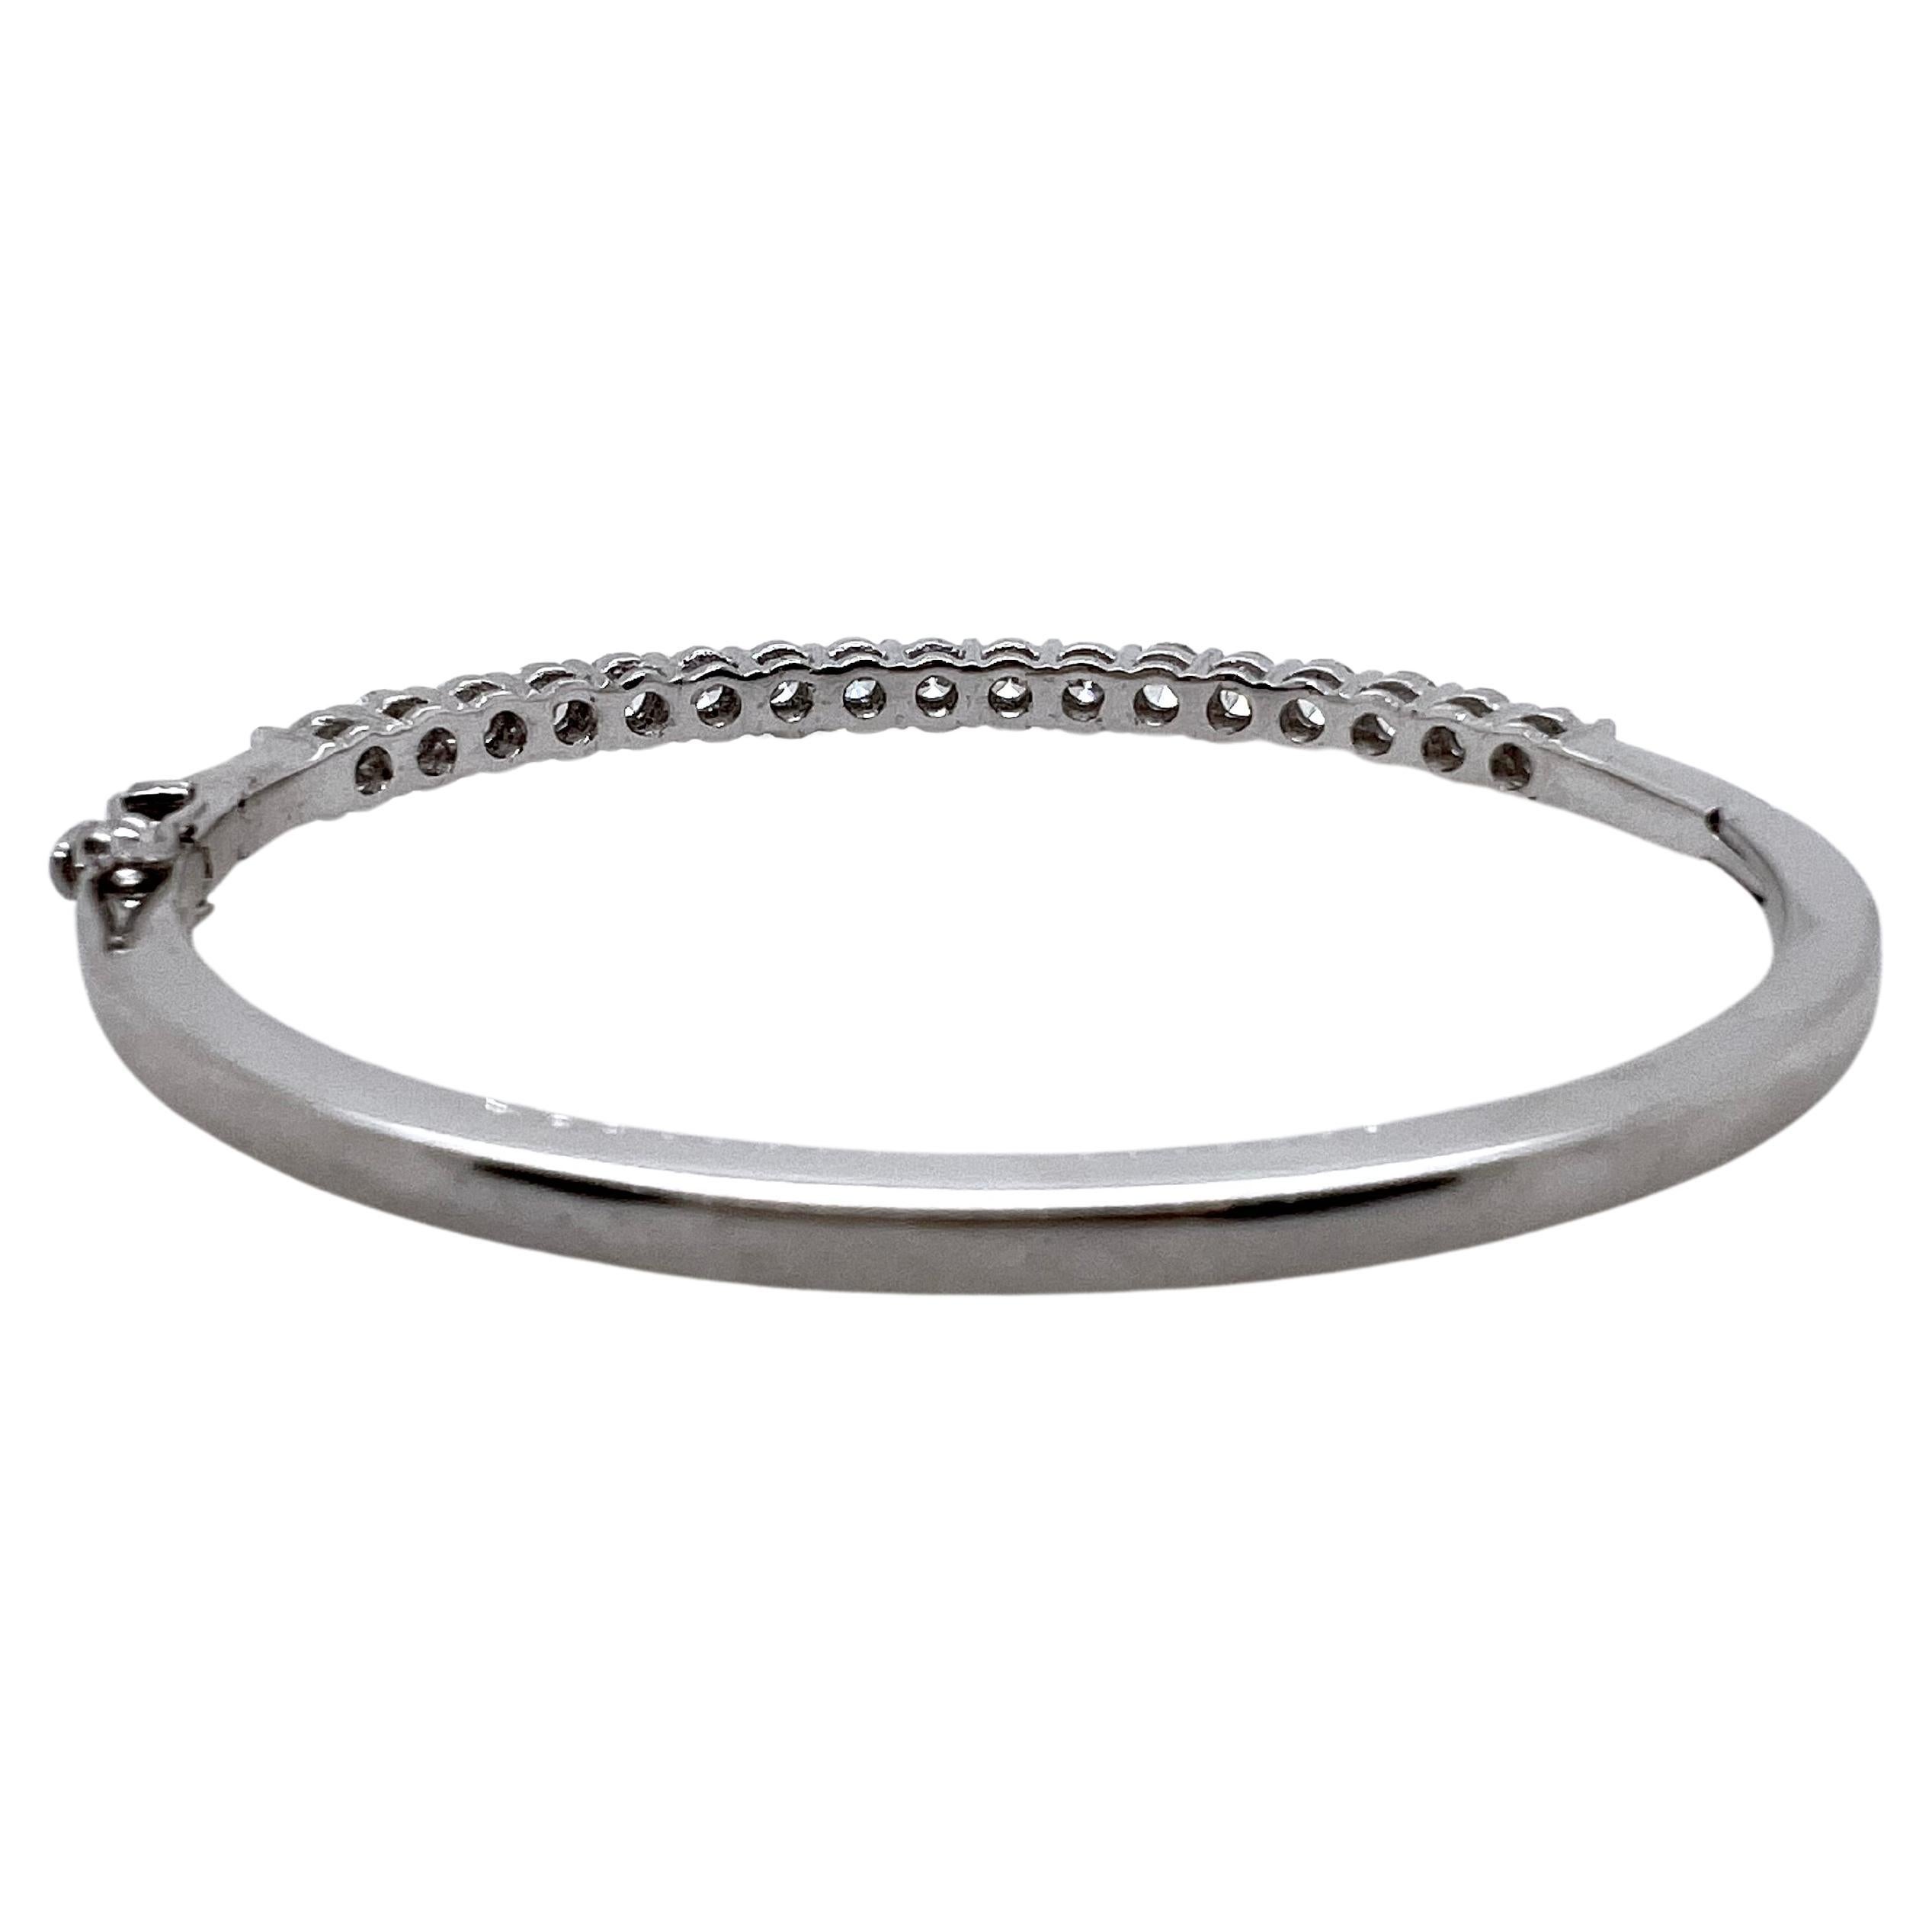 This classic diamonds bangle is set in 18k white gold with approximately 20 pointer round brilliant diamonds.  They are shared prong set, and creates a visual line of diamonds.  It can be worn dressed up or casually, so it is versatile.  Great to